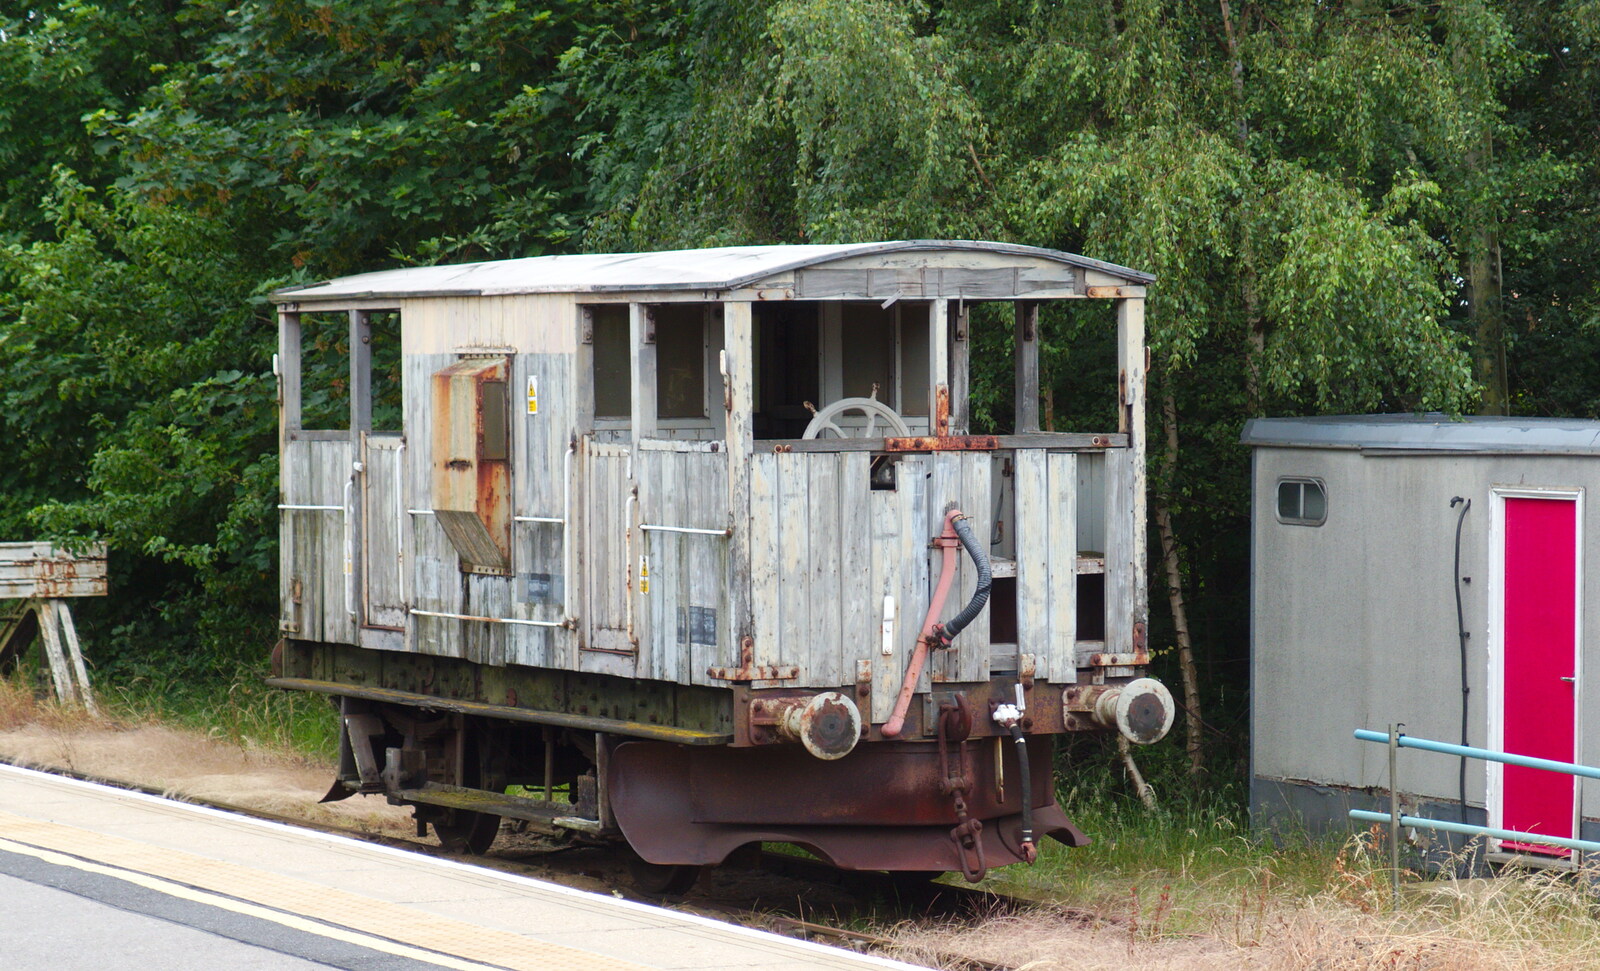 Another shot of the brake wagon at Shenfield  from Railway Hell: A Pantograph Story, Chelmsford, Essex - 17th June 2014